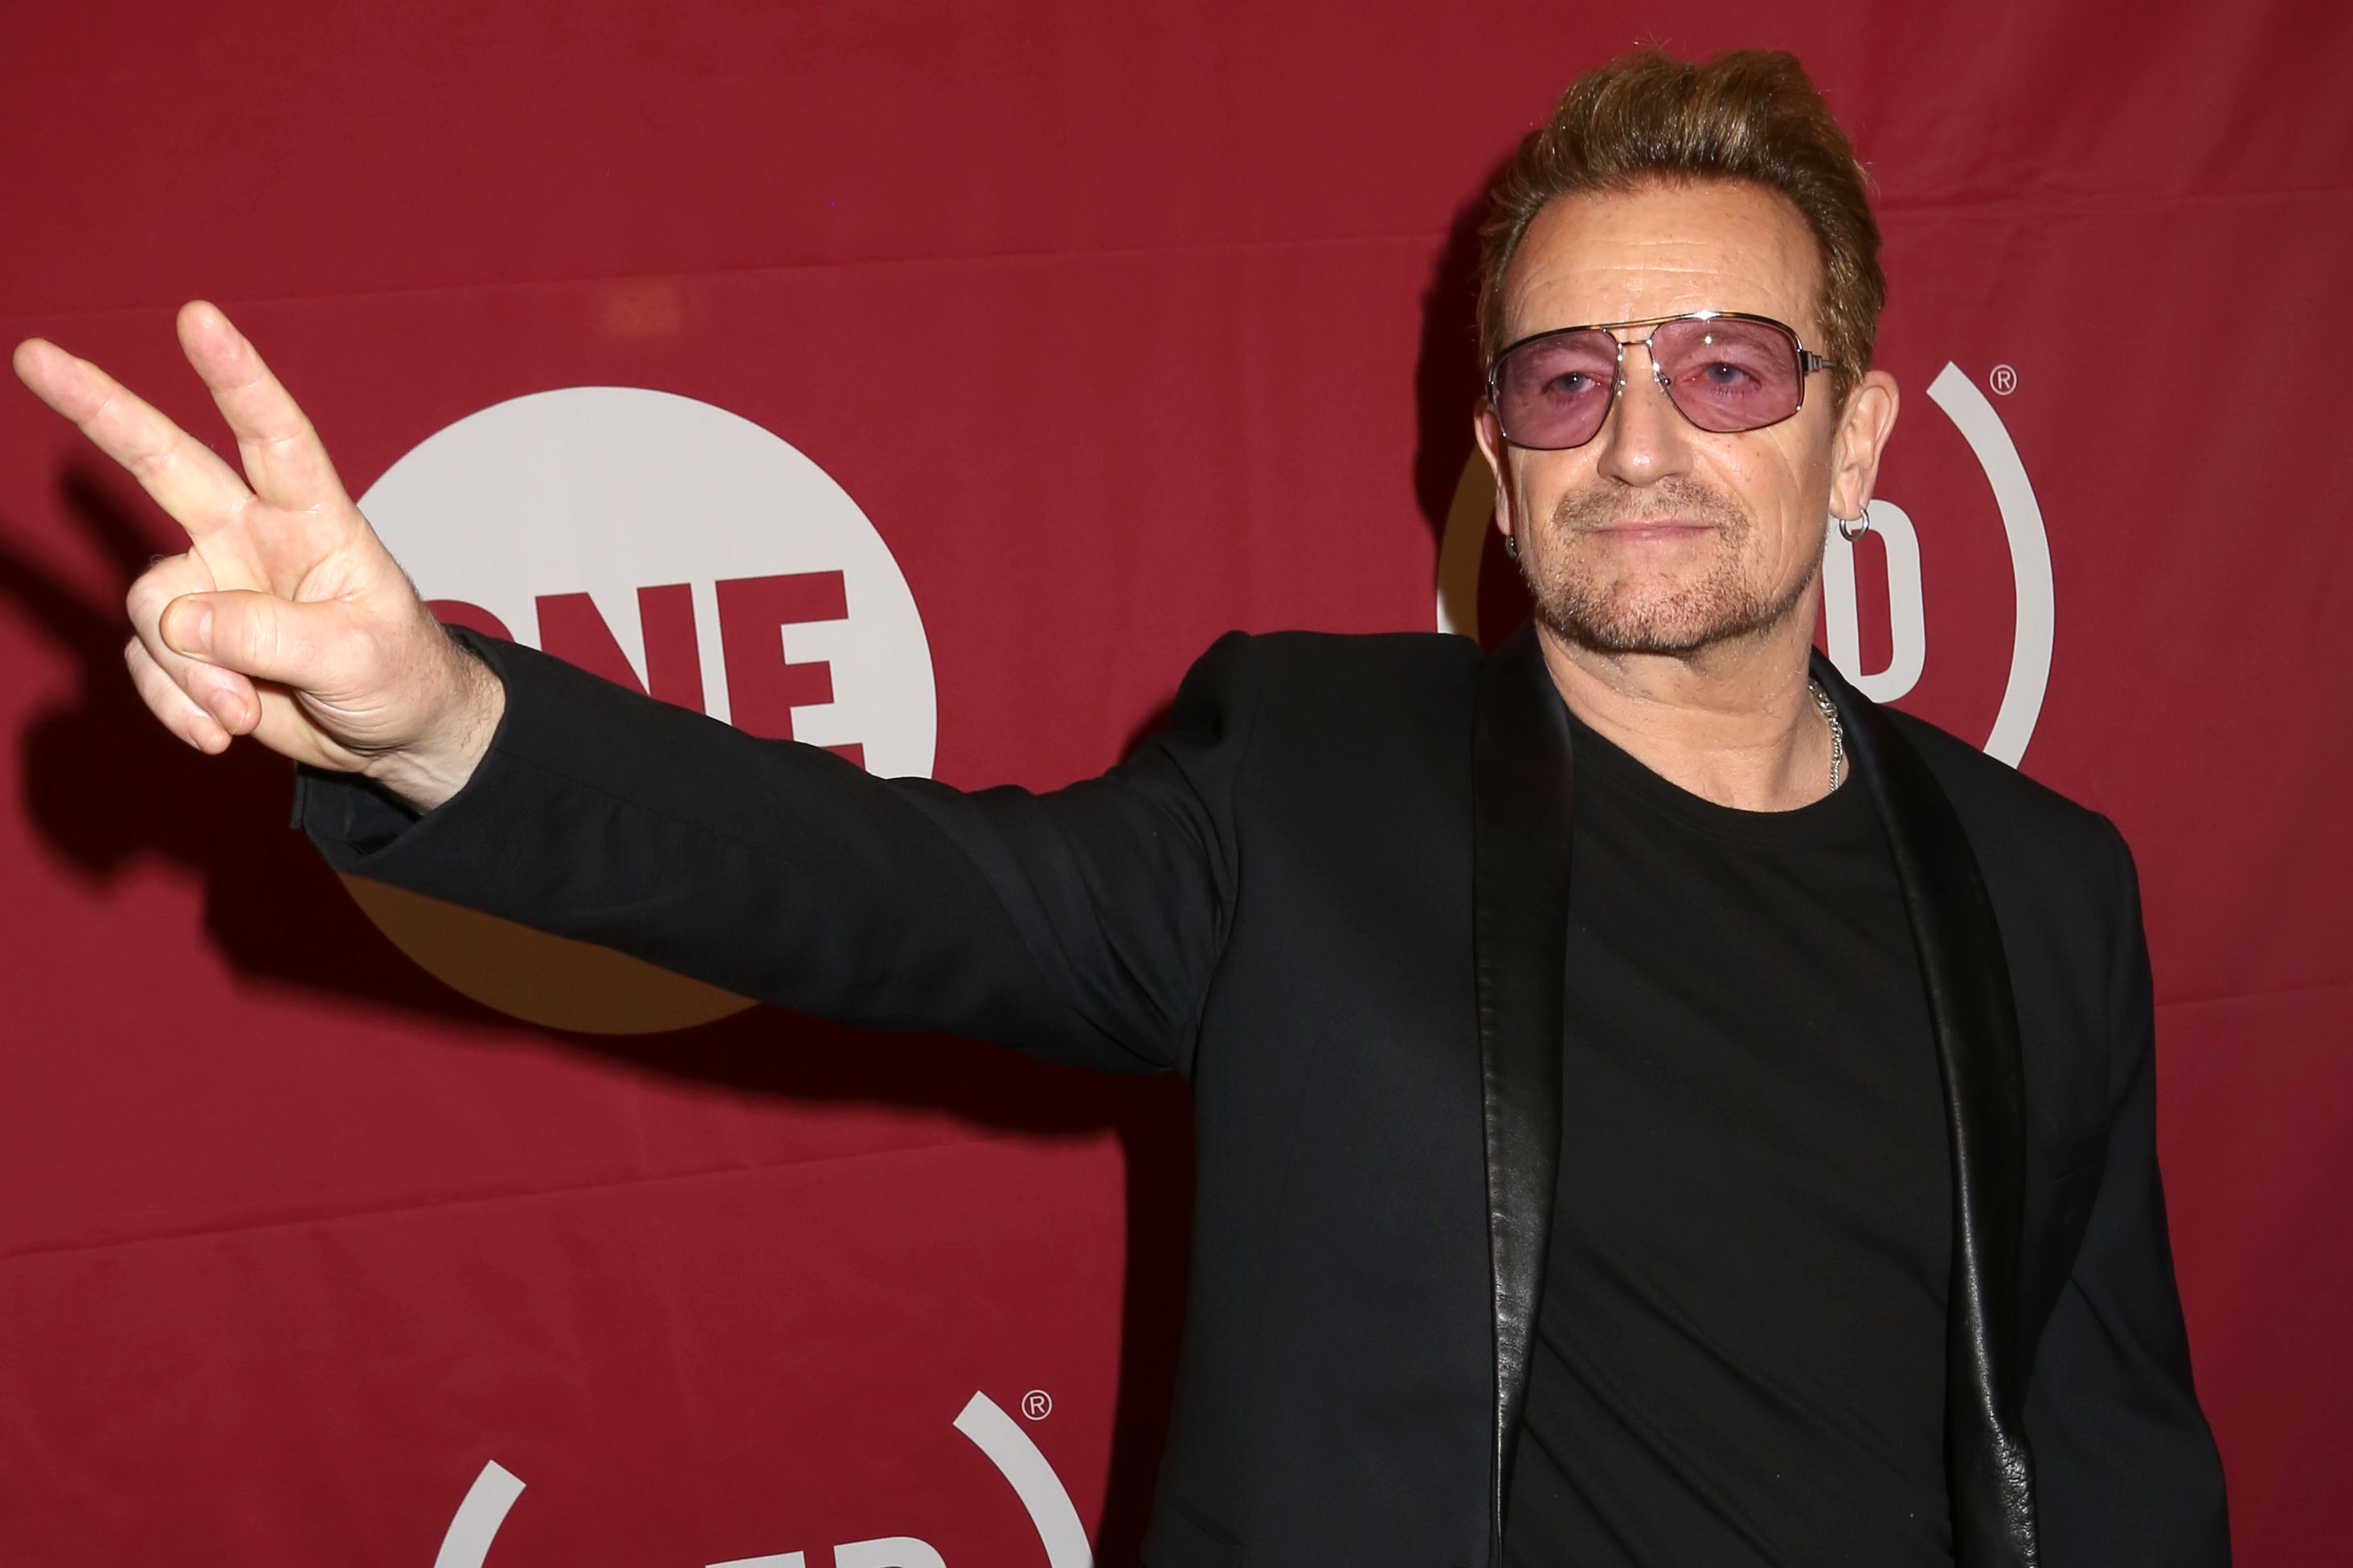 Bono attends a ONE event at Carnegie Hall on Tuesday, Dec. 1, 2015, in New York. (Greg Allen—AP)